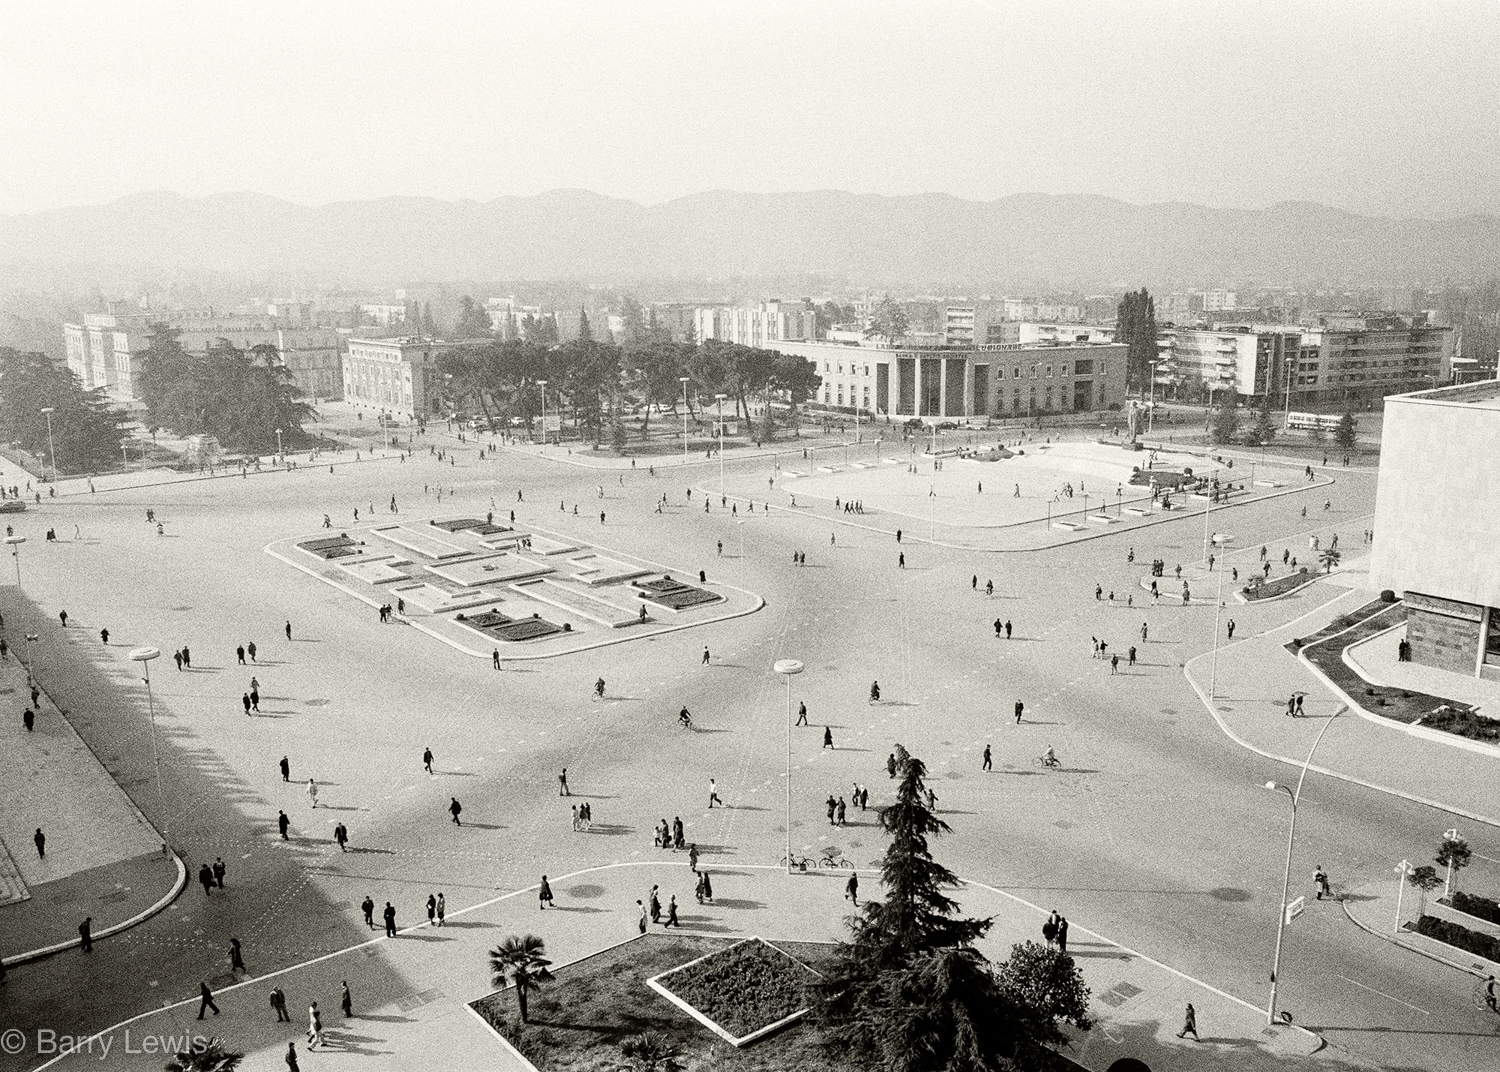  8am rush hour in Skanderbeg Square, Tirana, 1989
The quiet serenity of this busy scene is because prior to 1991, it was illegal to own a private car in Albania.The city is now choked with  cars, lorries and buses which burn fuel banned in the EU. Ti